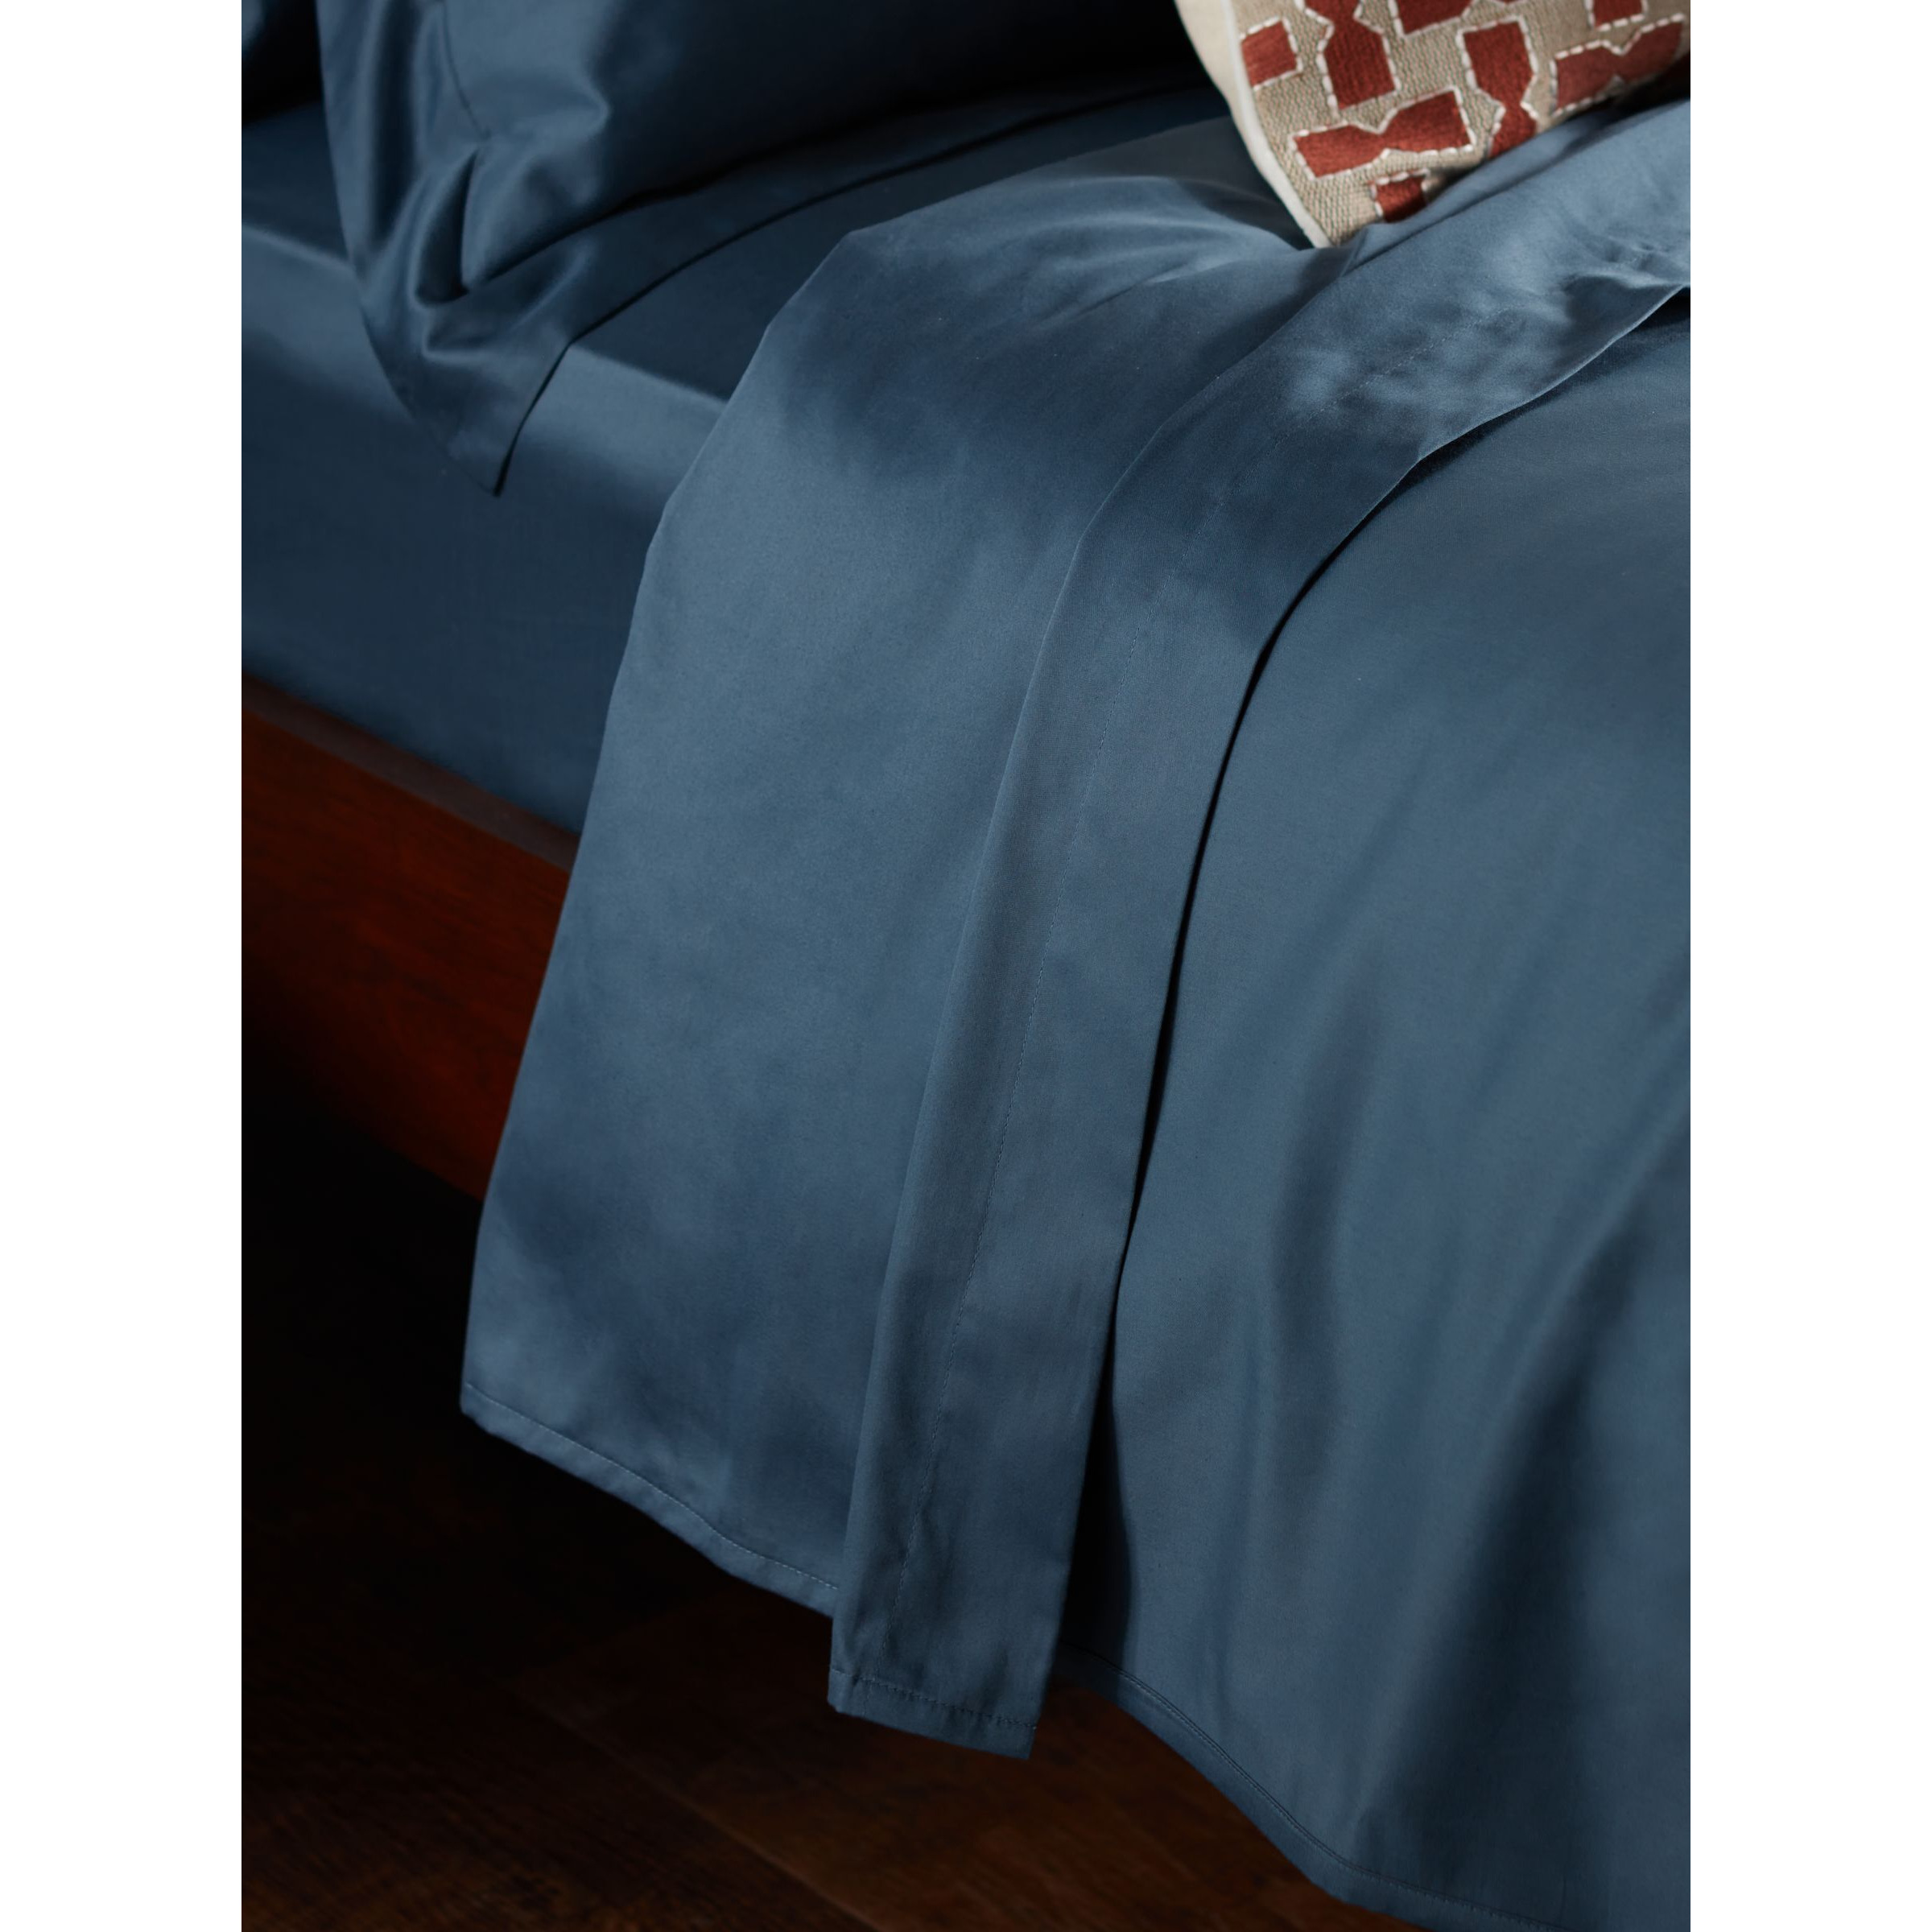 John Lewis Soft & Silky Specialist Temperature Balancing 400 Thread Count Cotton Flat Sheet - image 1